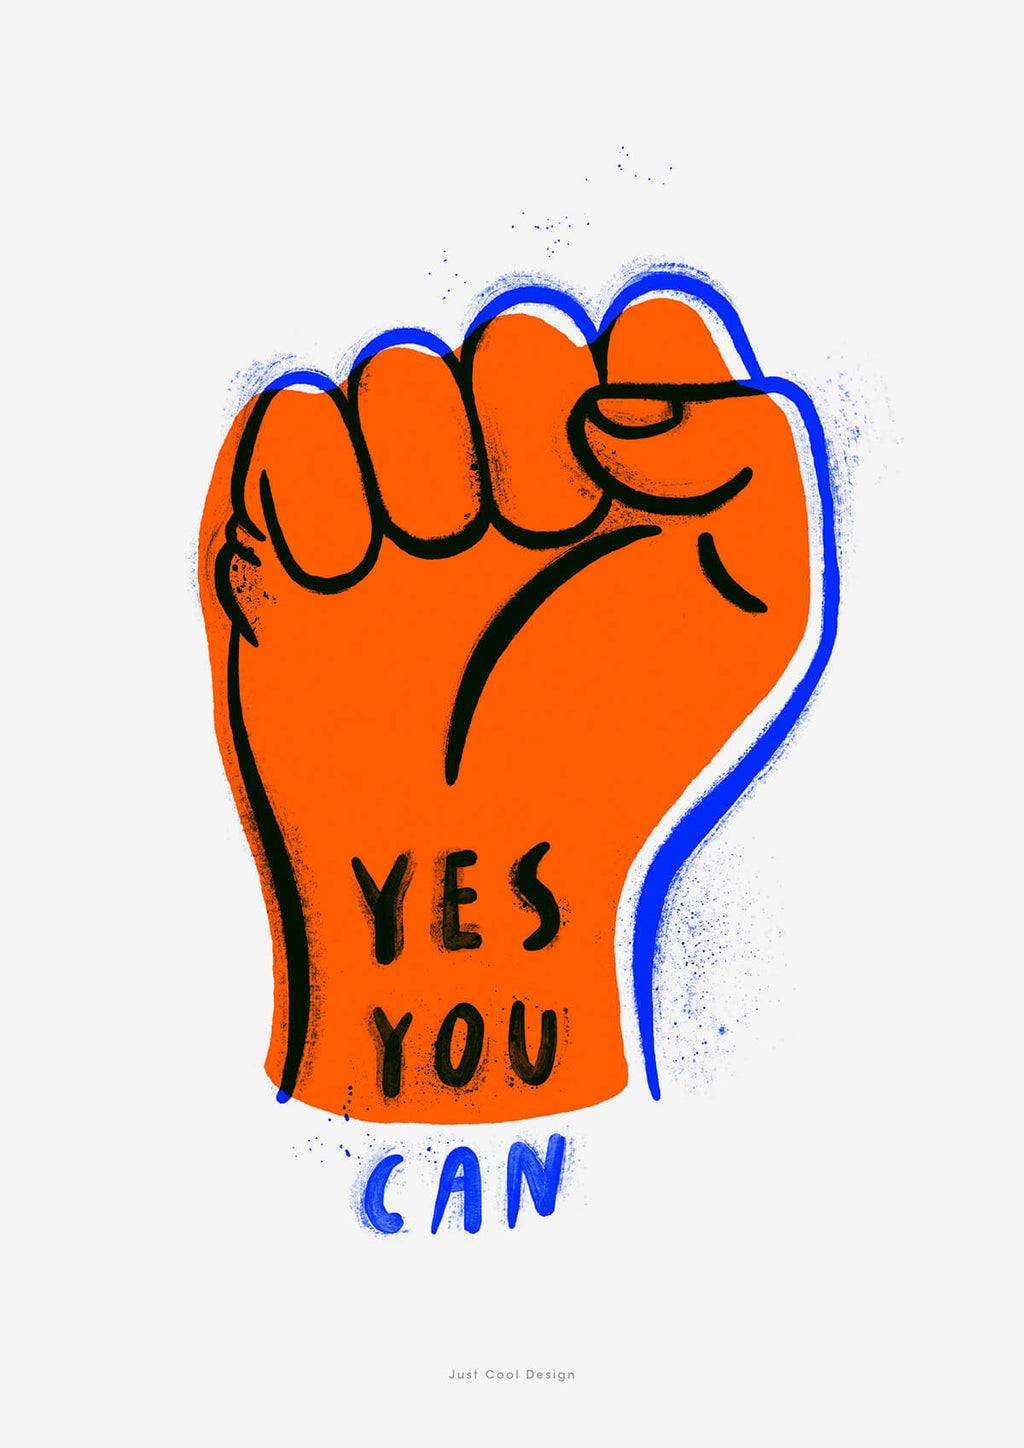  Yes You Can!